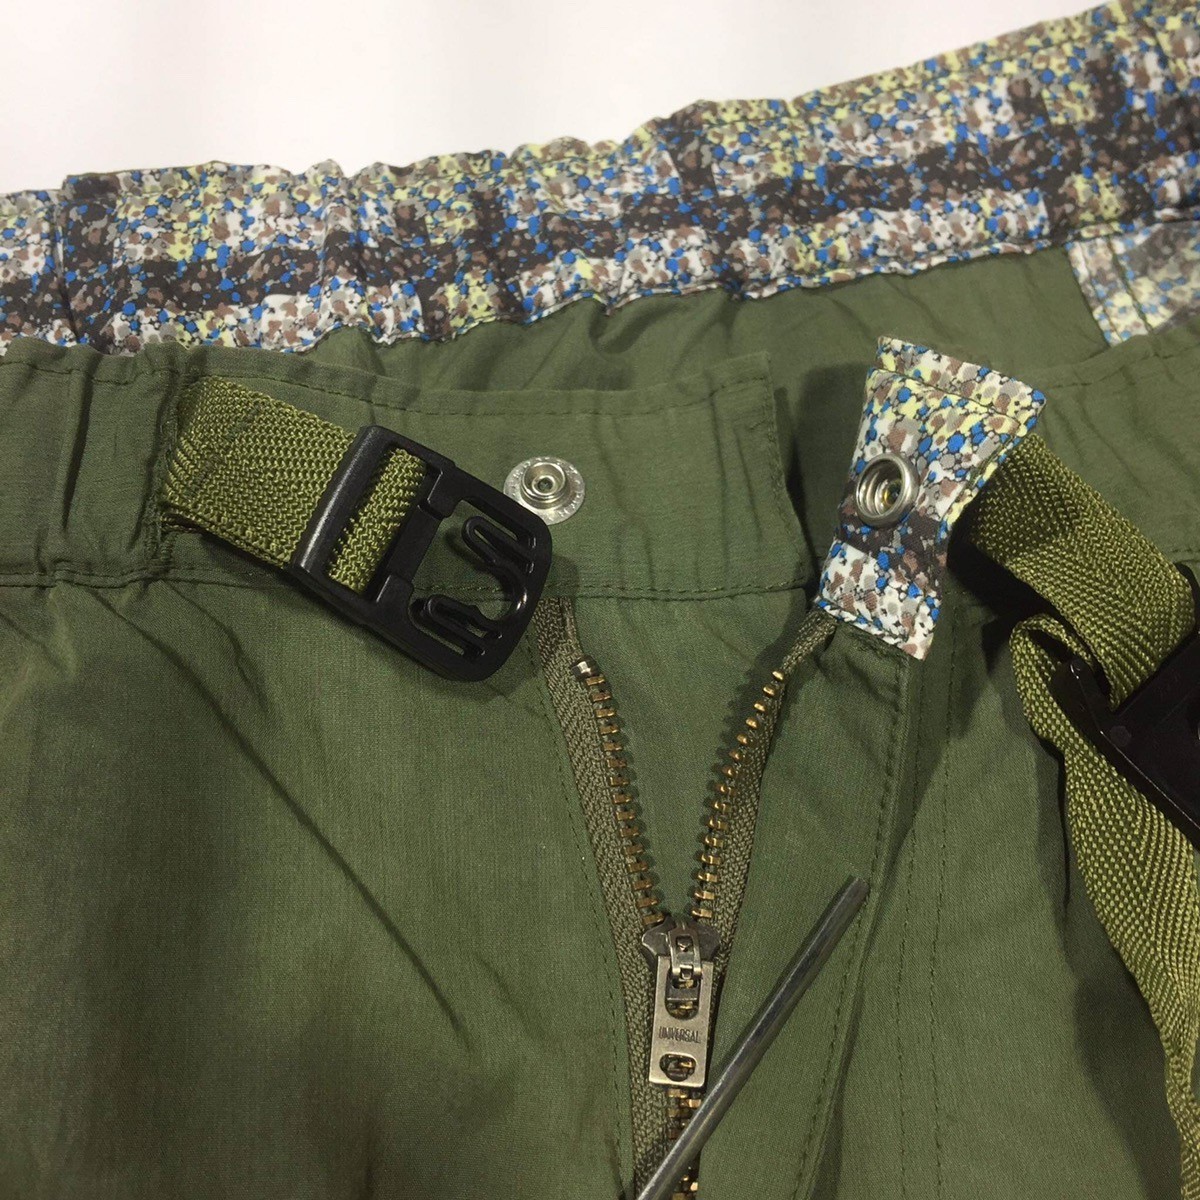 Coach Easy Pants Pique Typewriter Olive - 10